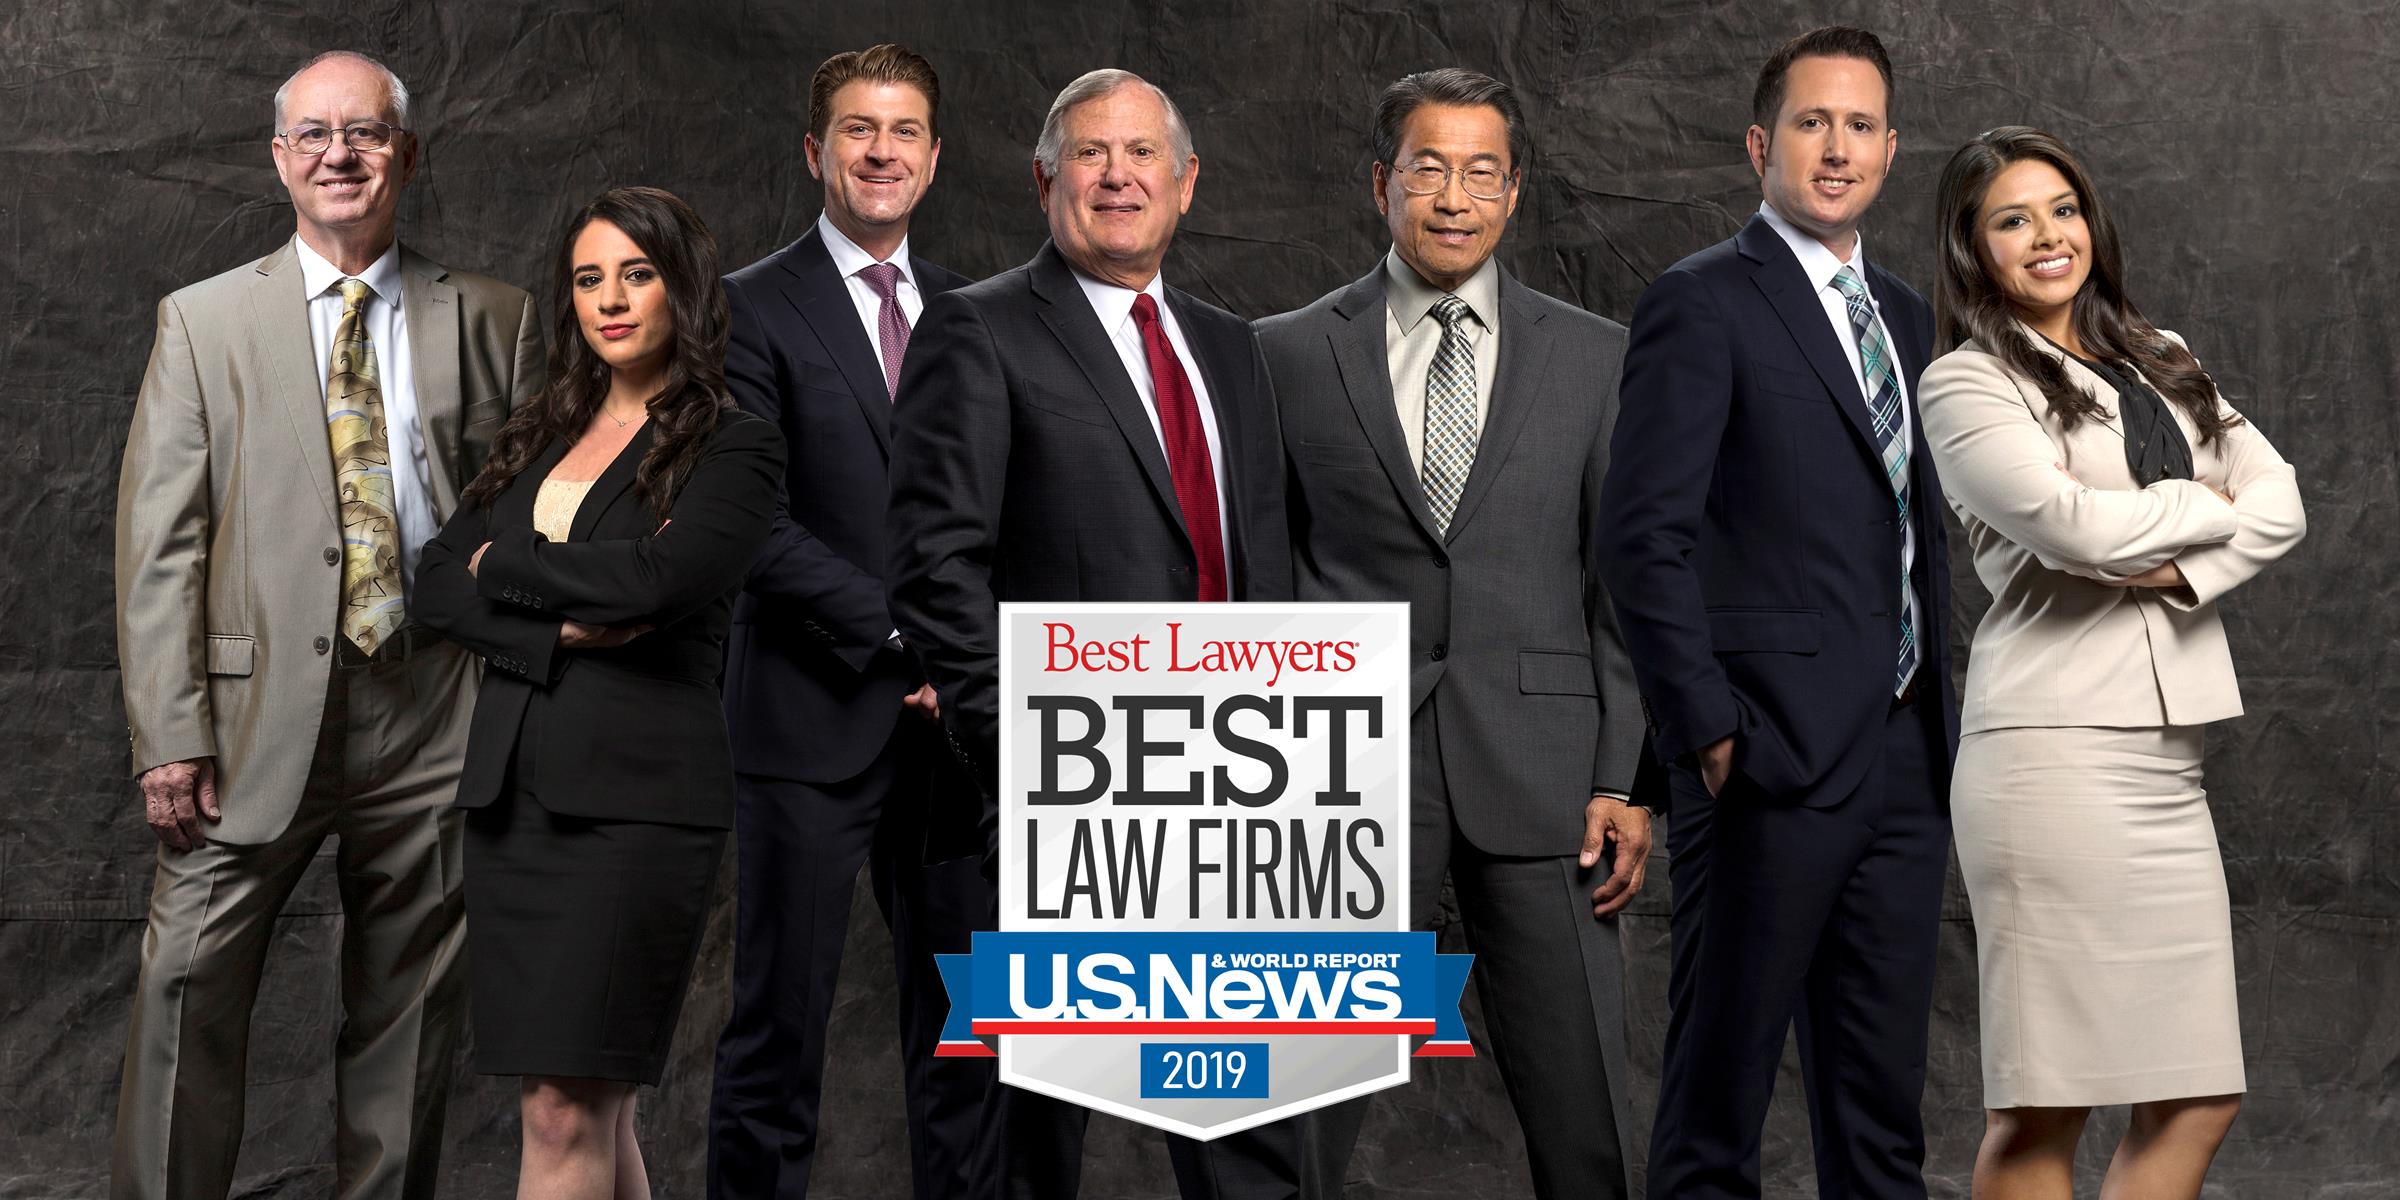 Chain | Cohn | Clark ranked in U.S. News & World Report’s ‘Best Law Firms’